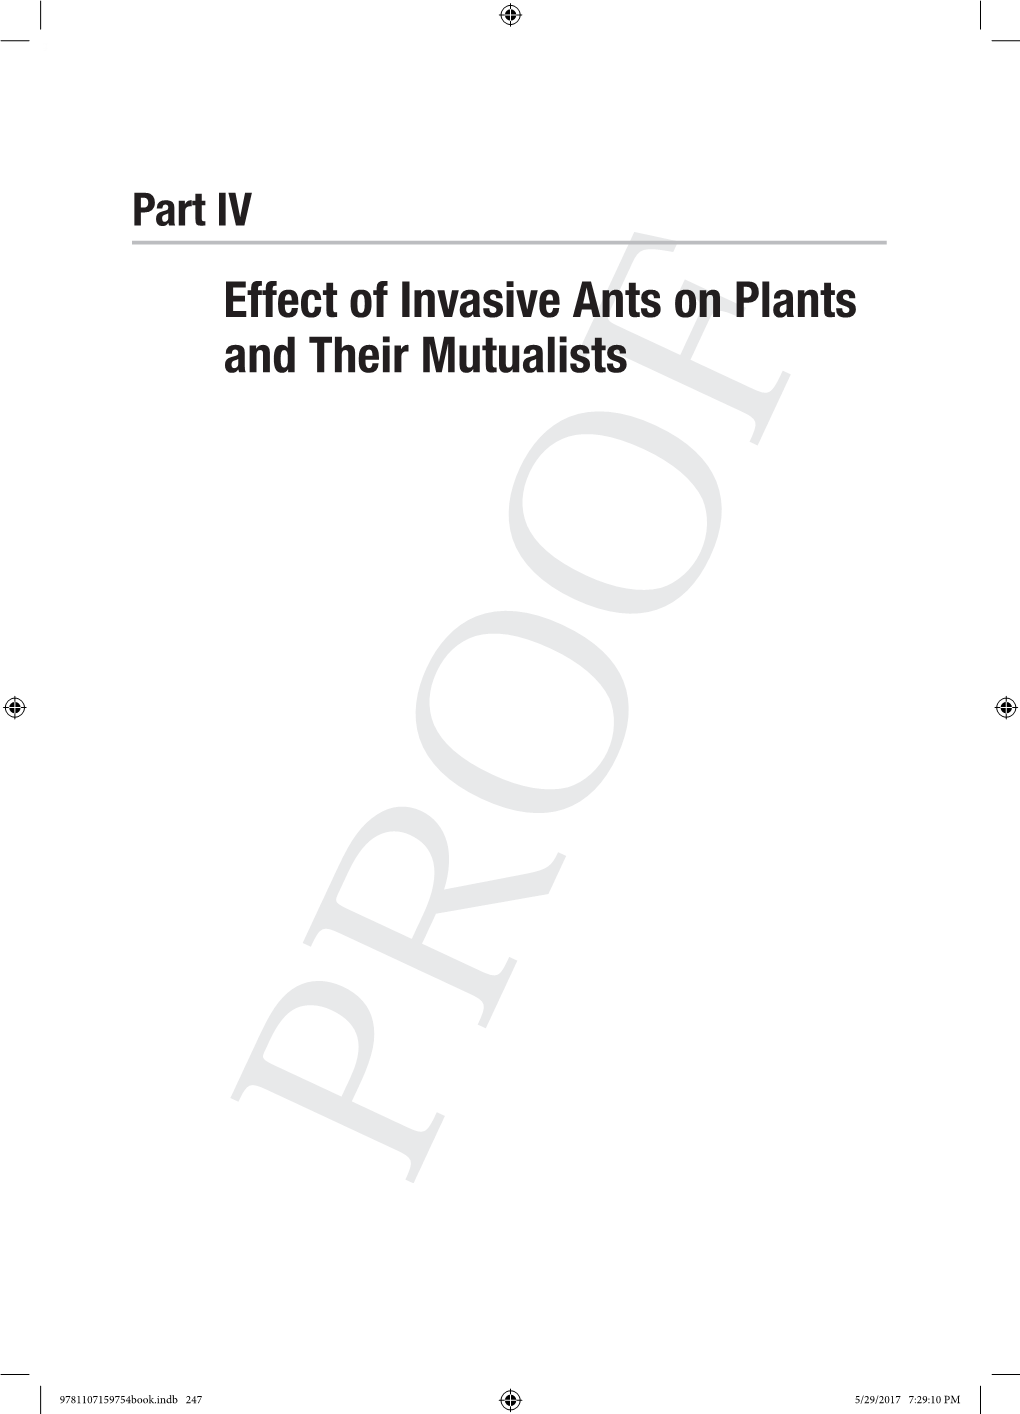 Effect of Invasive Ants on Plants and Their Mutualists